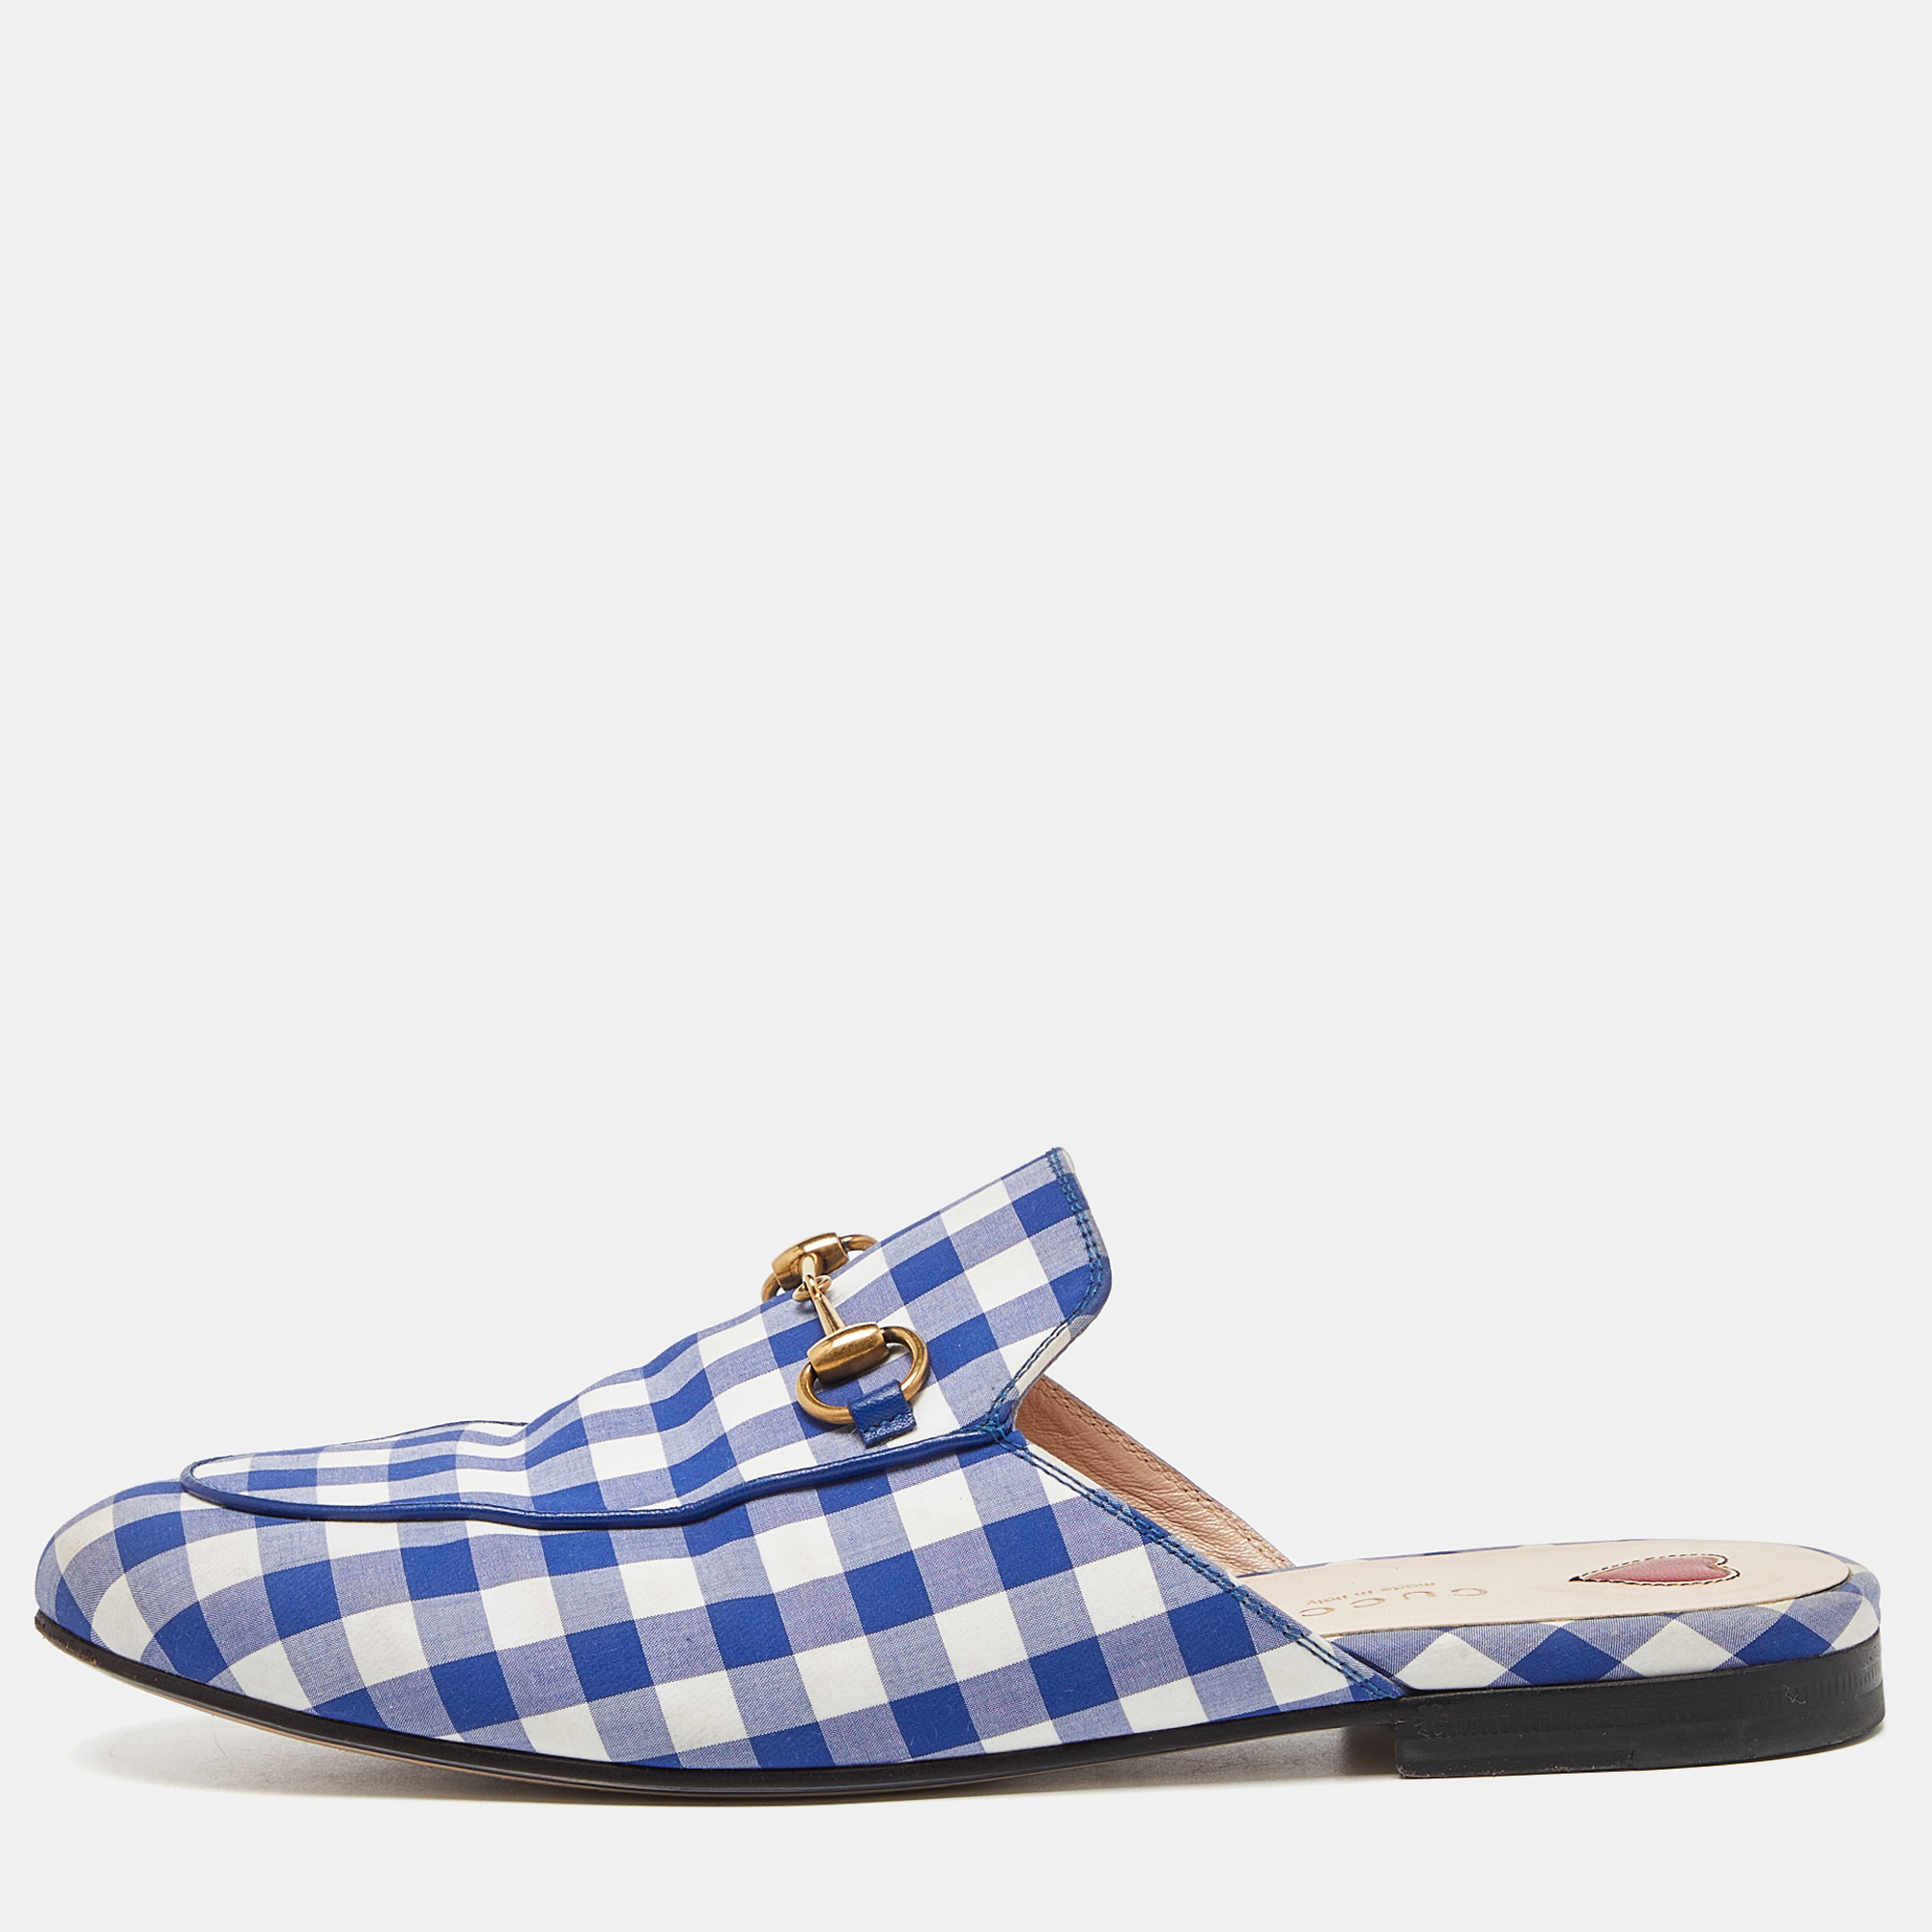 Pre-owned Gucci Blue/white Plaid Fabric Princetown Flat Mules Size 38